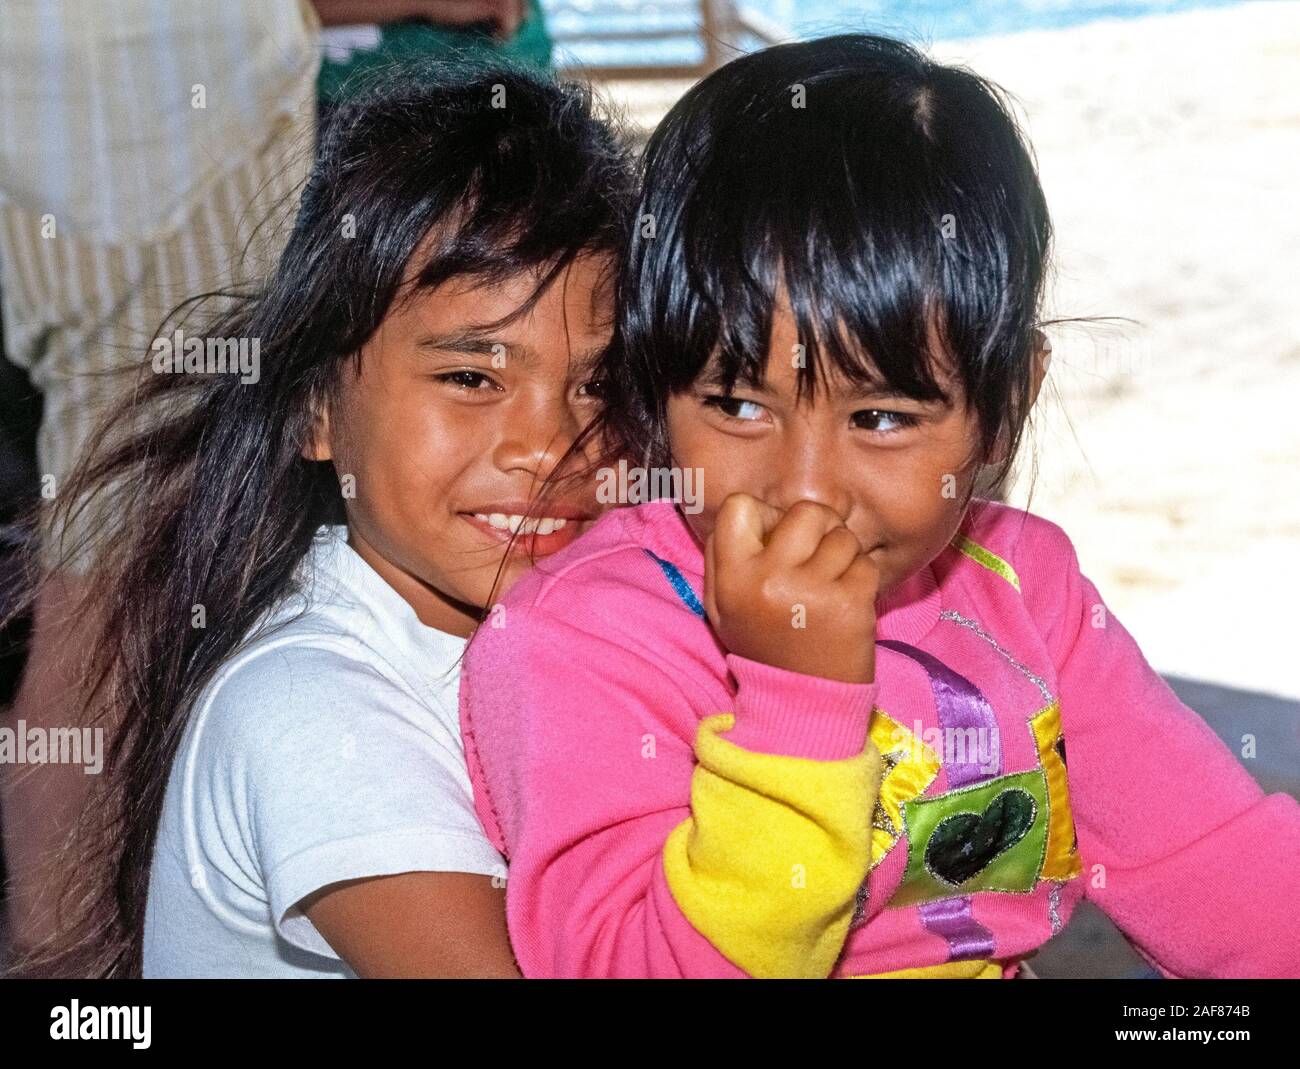 Two young Native Hawaiian girls smile at visitors to Niihau, an isolated Pacific Ocean island in Hawaii, USA. It  is known as the Forbidden Island because only Niihauans born on the island are permitted to live there and tourists are limited to a helicopter excursion to visit its shores for only a few hours. Privately owned by the same family since they purchased it from the king of Hawaii in 1864, the 72-square-mile island has less than 170 residents and is dedicated to preserving traditional Hawaiian culture. Niihau has no paved roads or running water; food is brought in by boat. Stock Photo